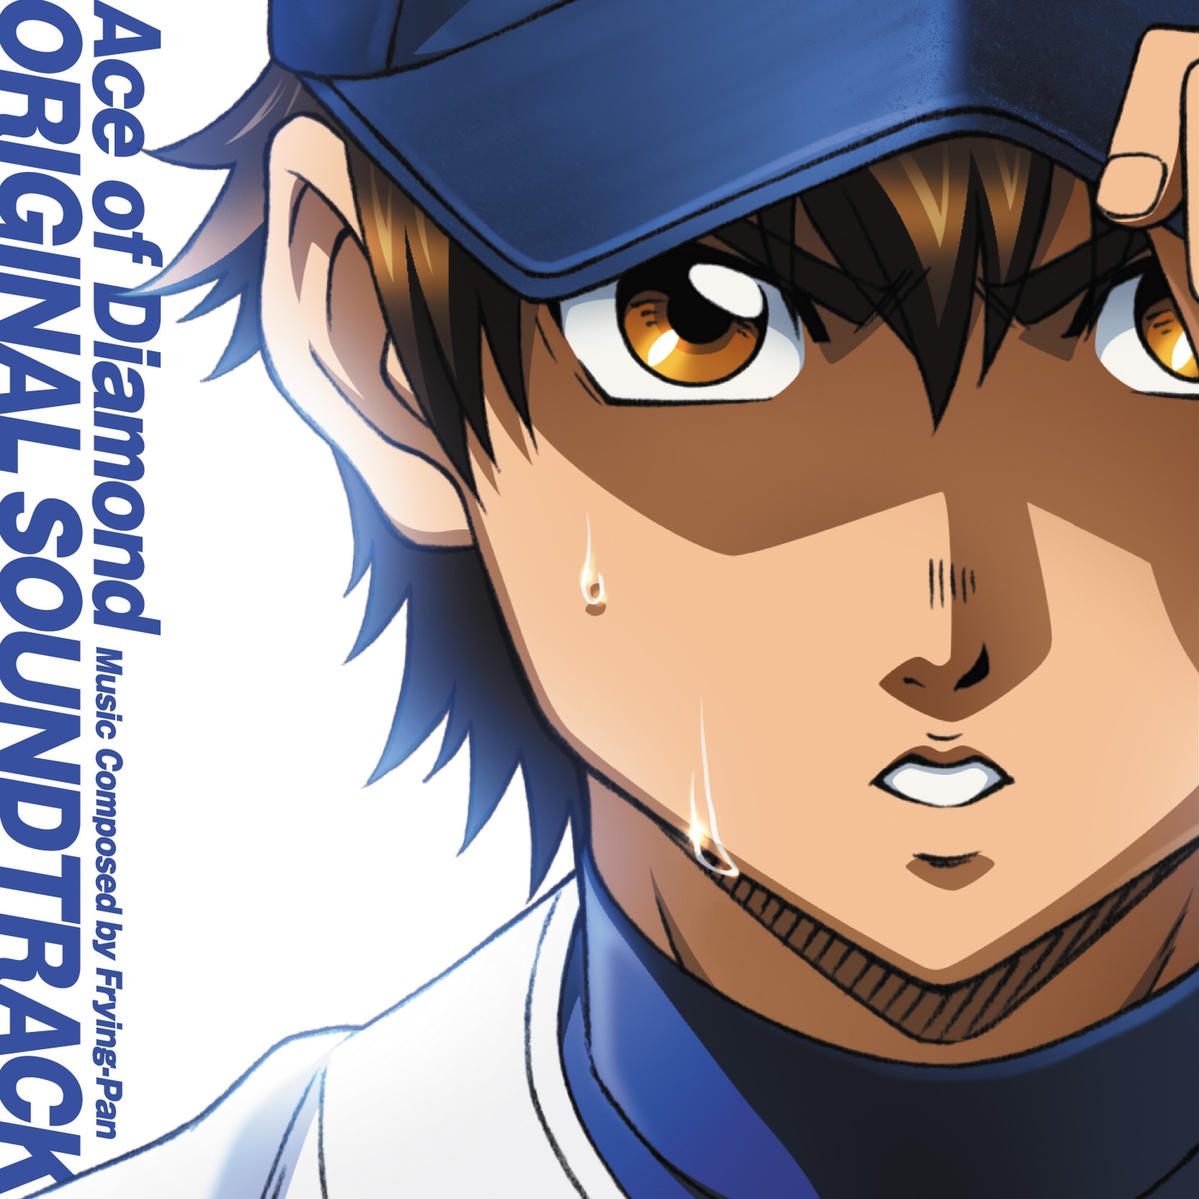 Grow stronger day by day Theme of Sawamura